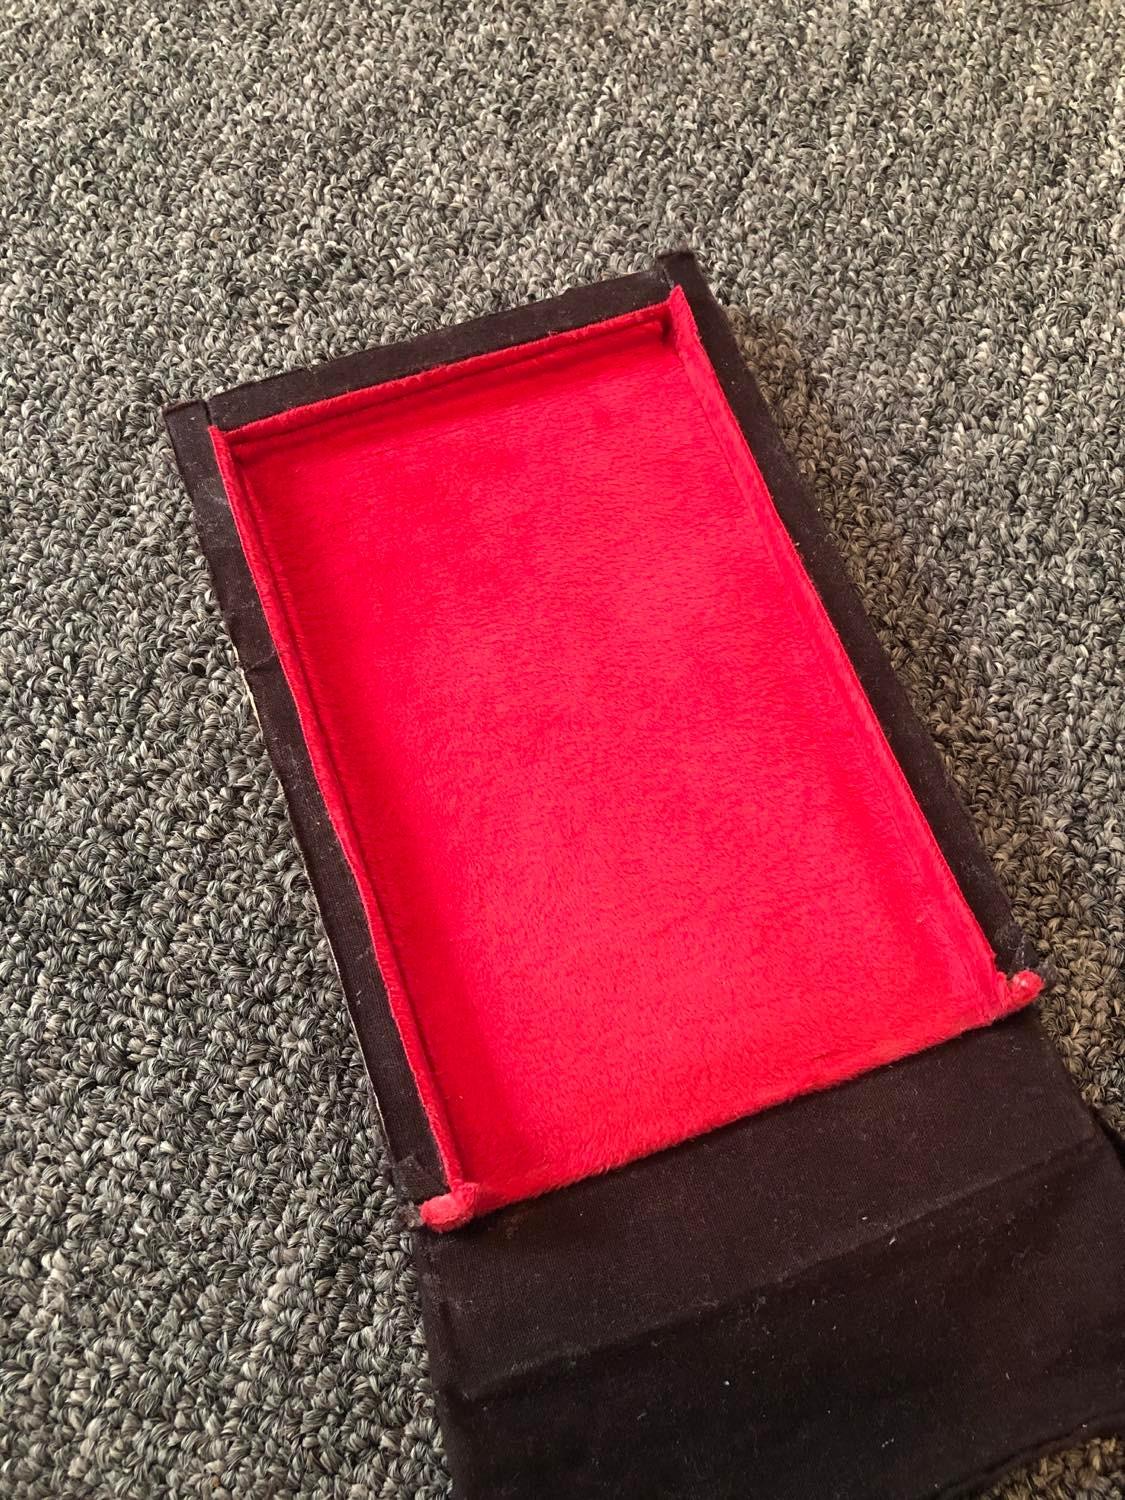 The red velvet lining of the box, appearing clean and flat. Think of it like, the box has had the top face of it removed, so basically an open box, except one side is a door. And the bottom face is hiding the cards